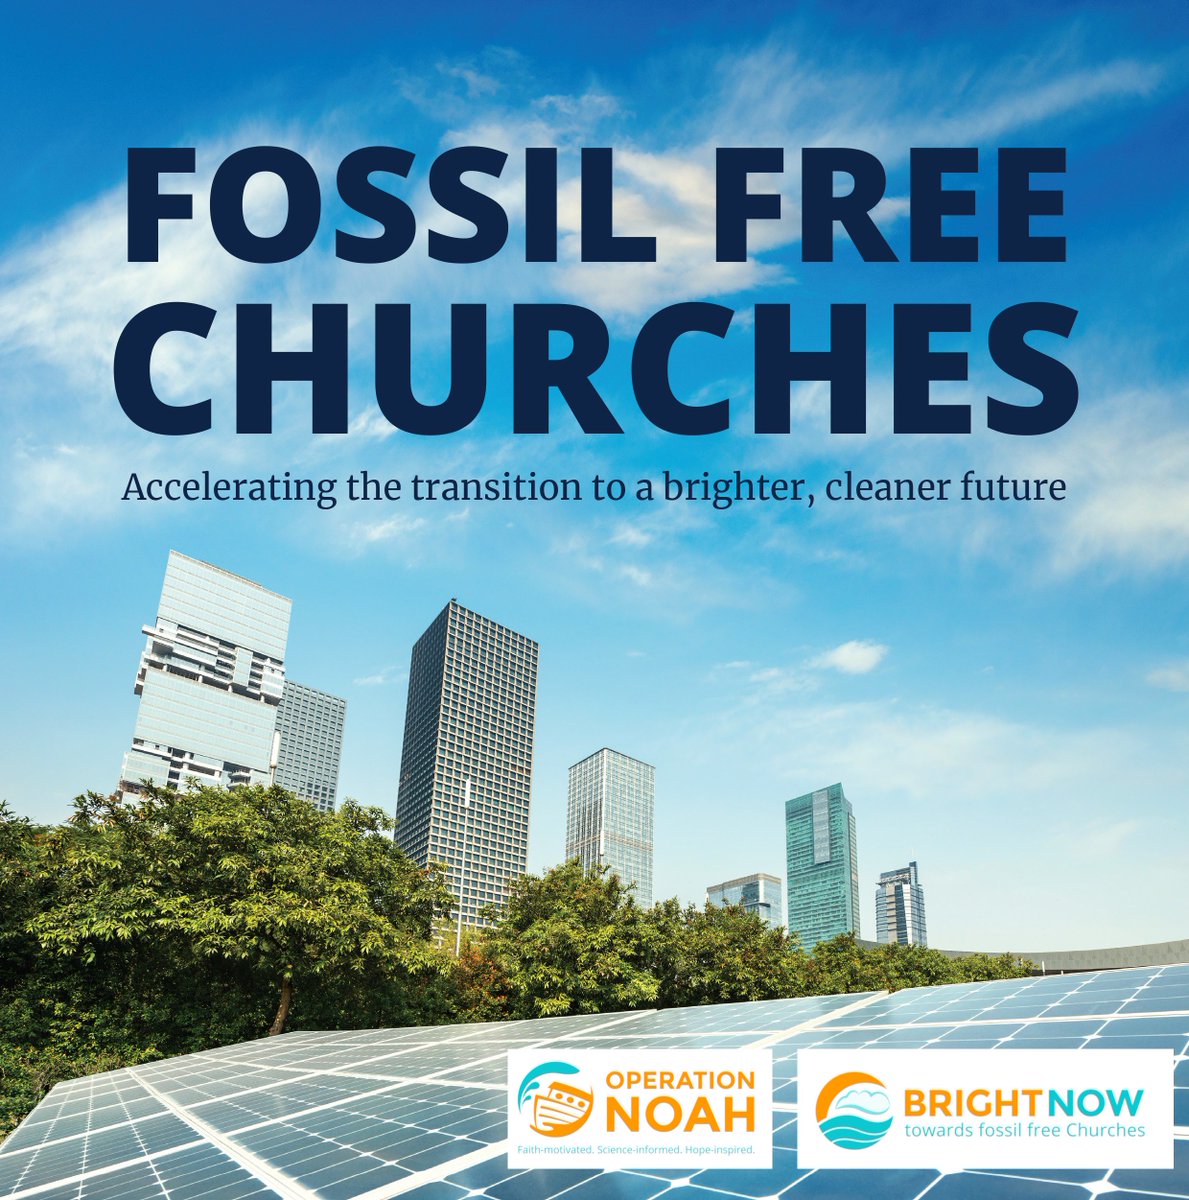 Movement to divest from fossil fuels gains momentum (@VaticanNews) bit.ly/36aqKFO #CatholicDadsHQ #CatholicDads #Catholic @OperationNoah #fossilfreechurches